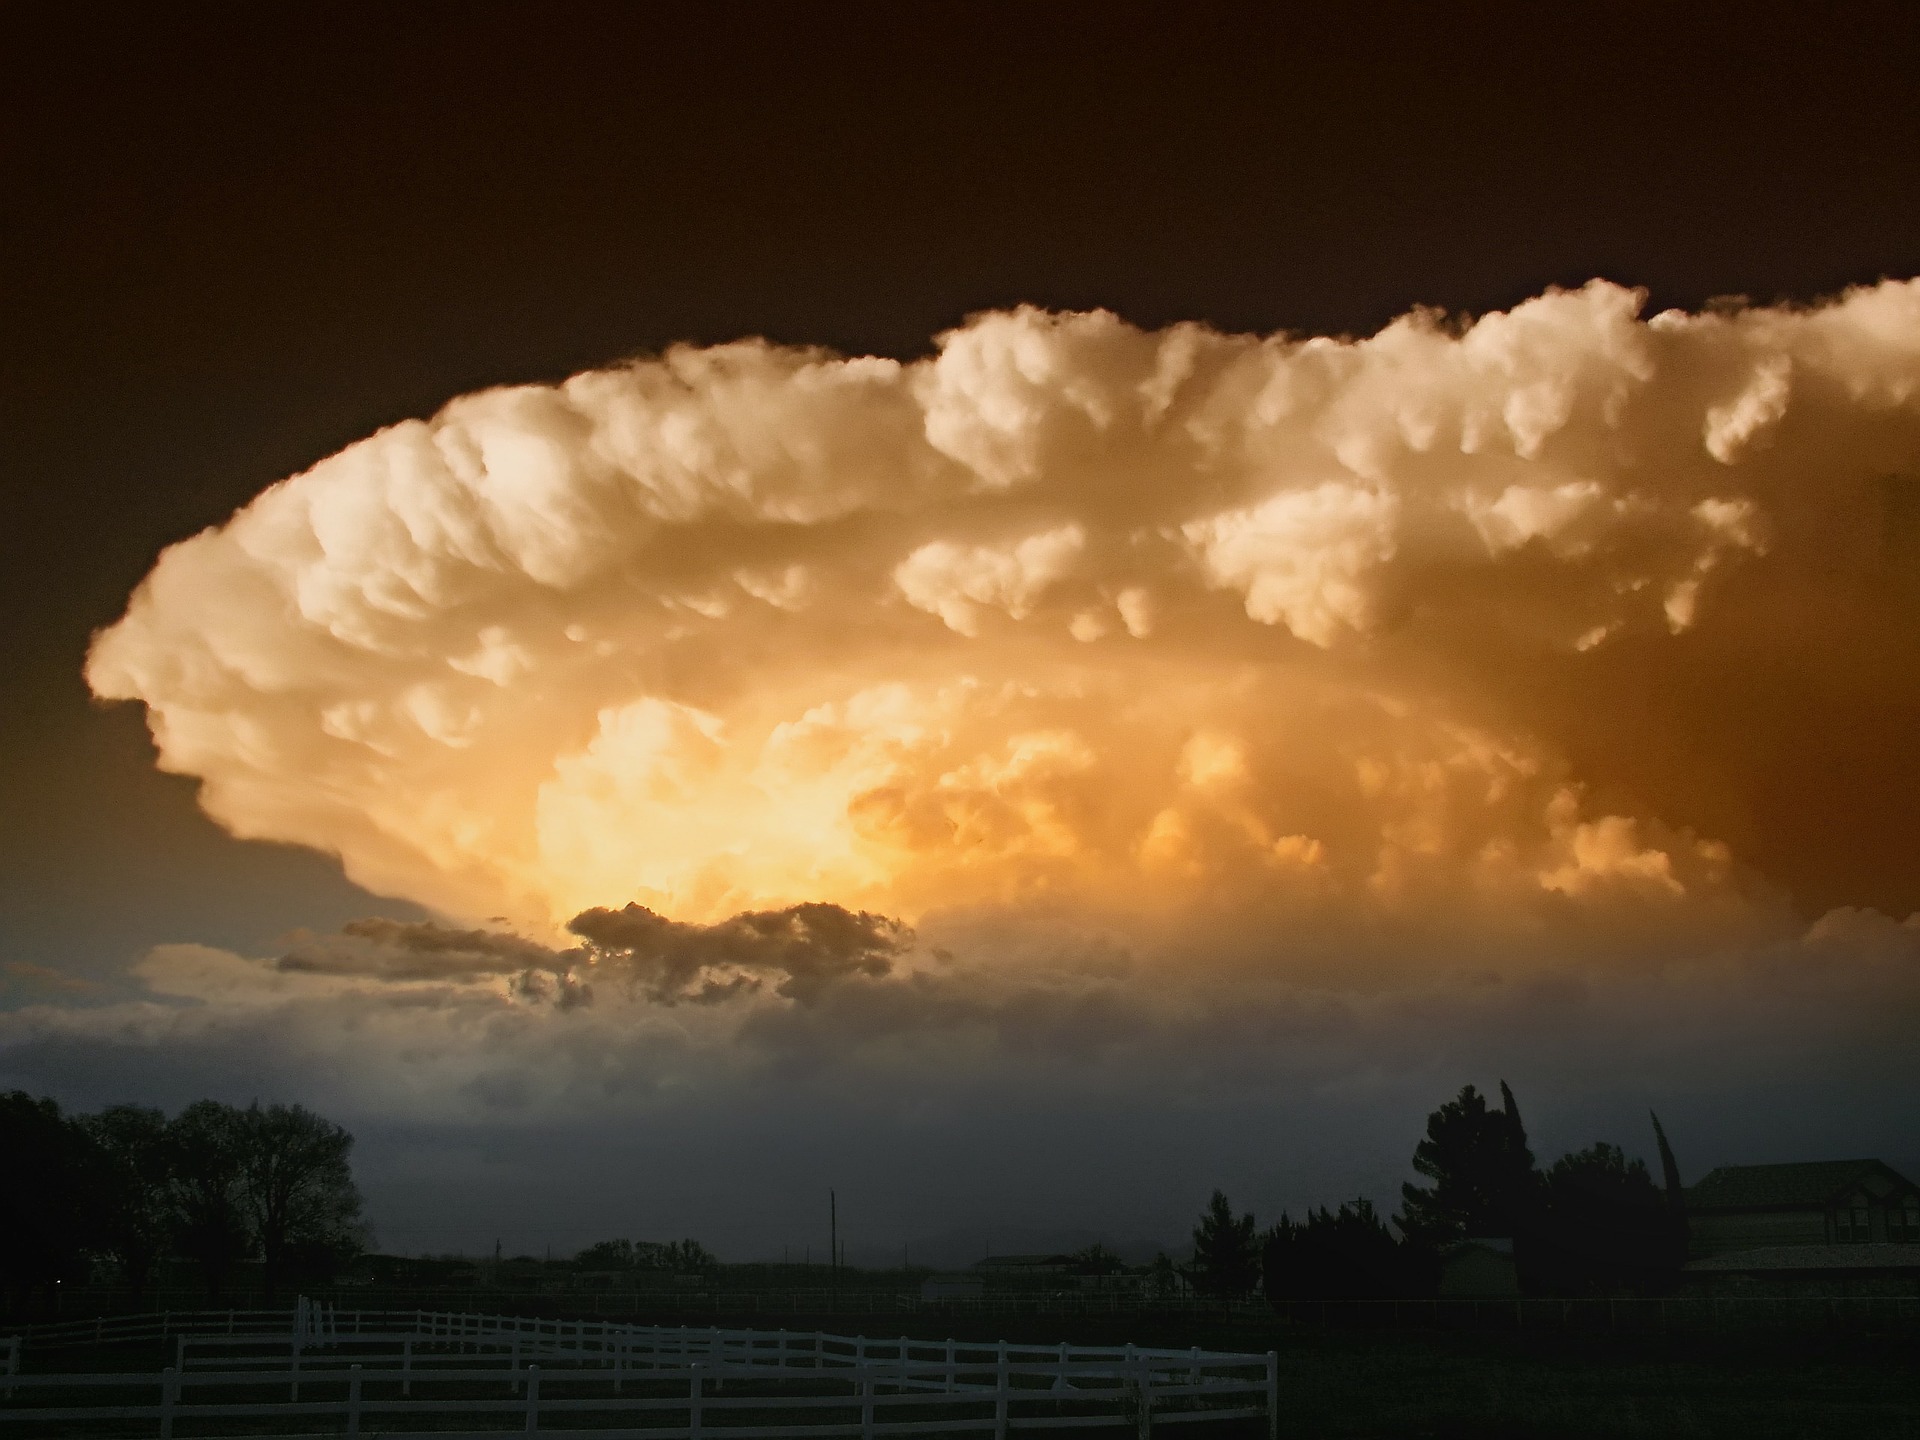 A supercell thunderstorm